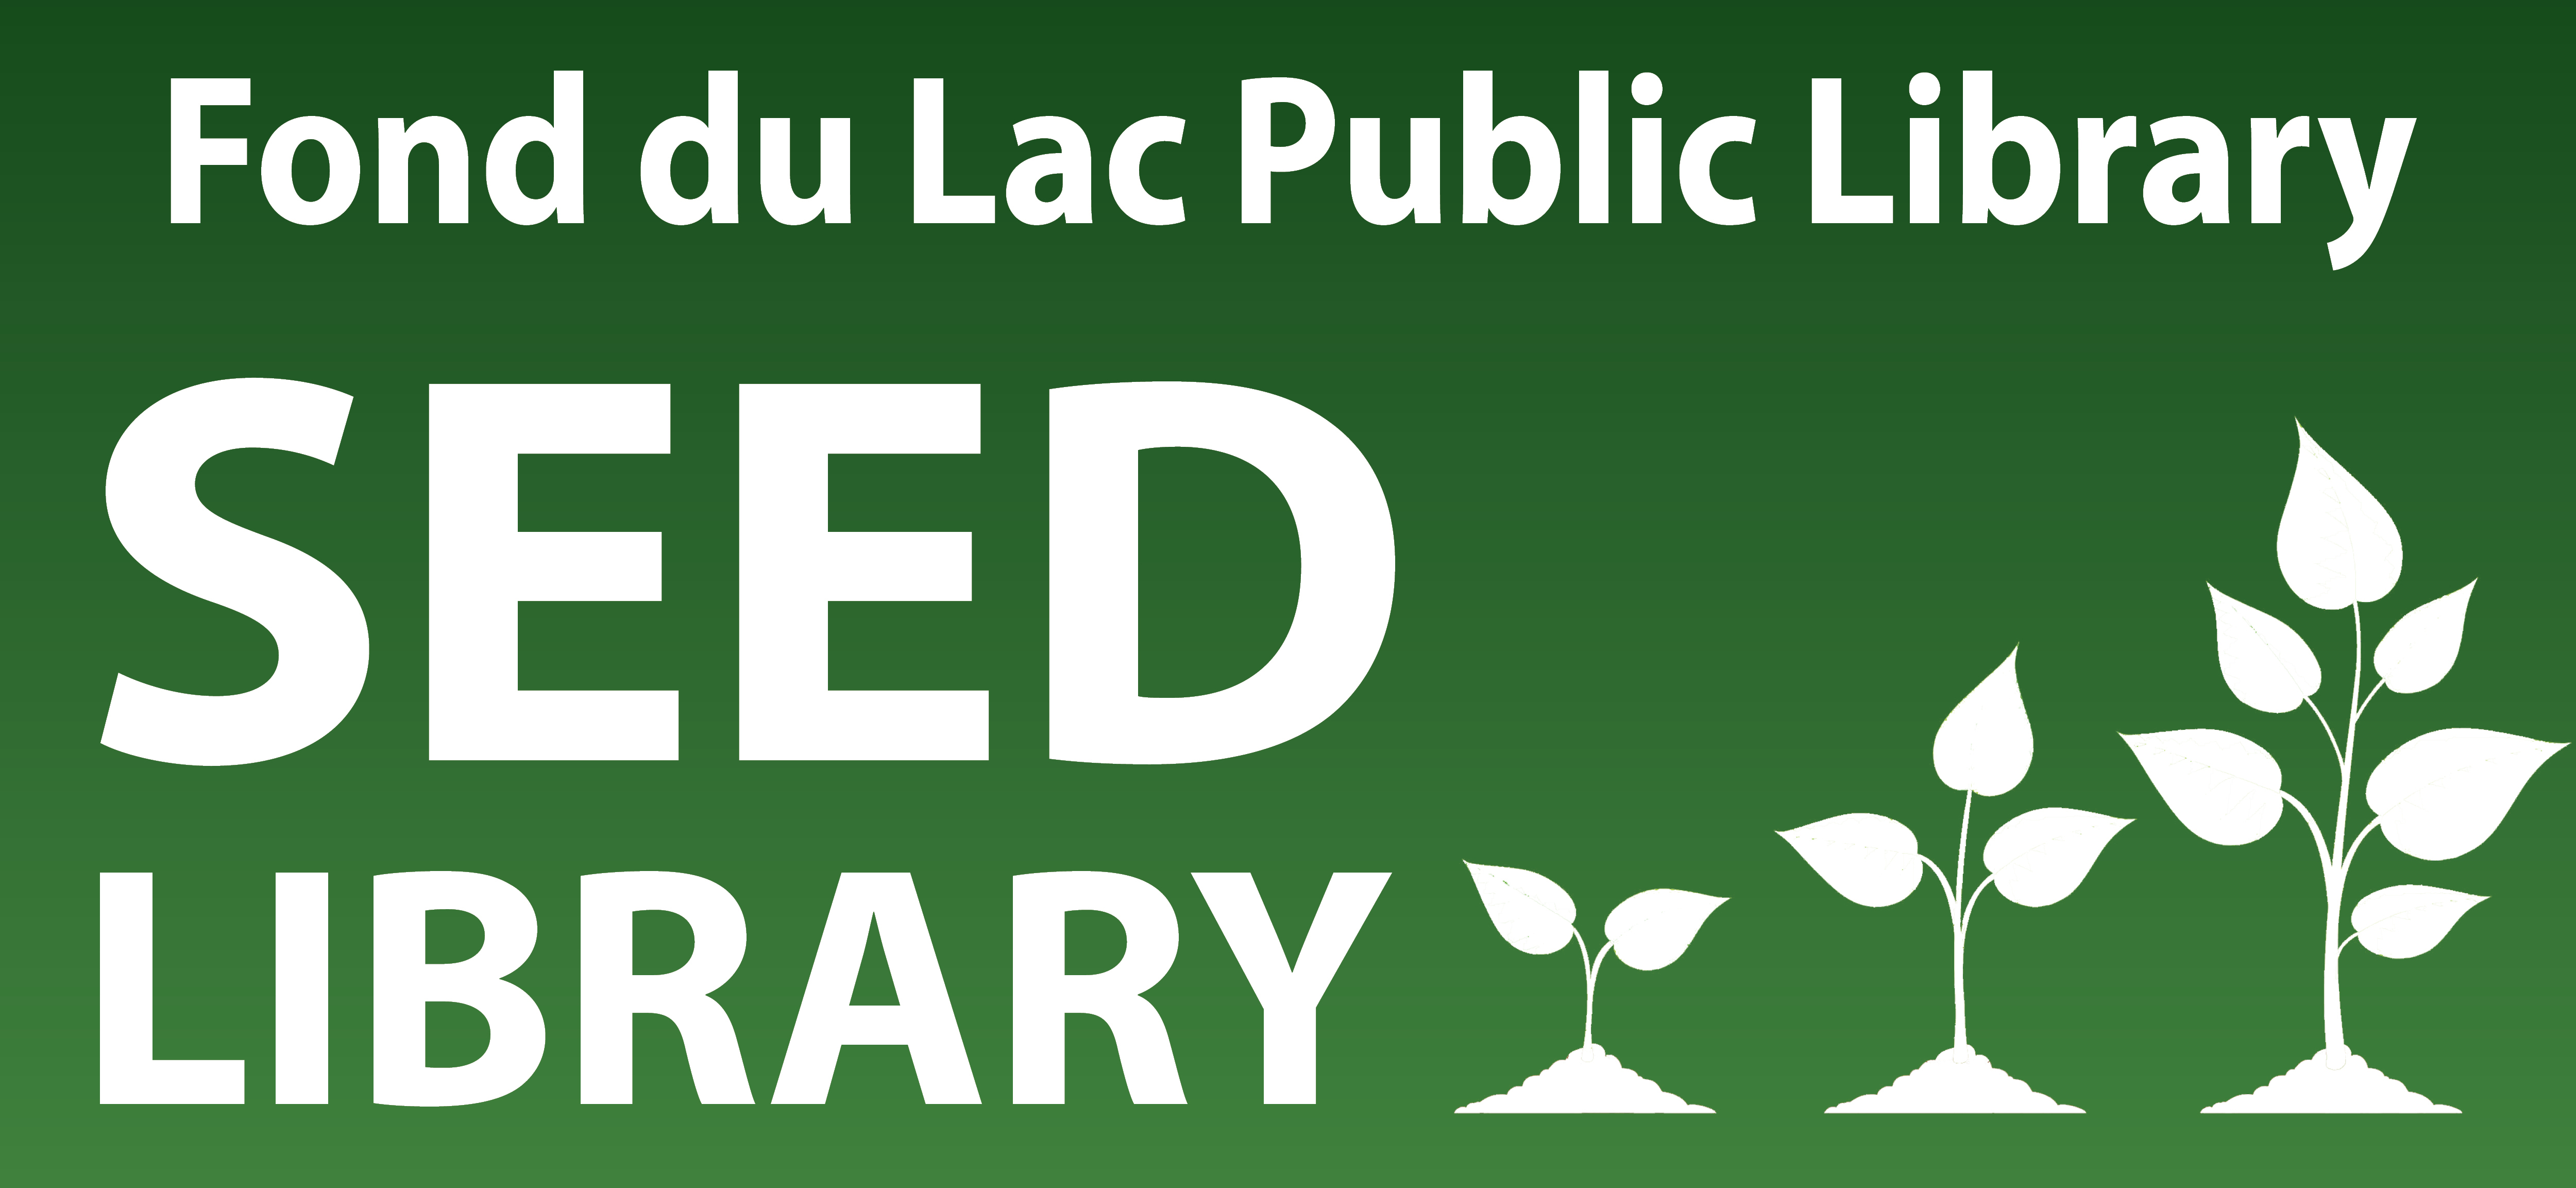 New Seed Library introduced just in time for growing season at the Fond du Lac Public Library